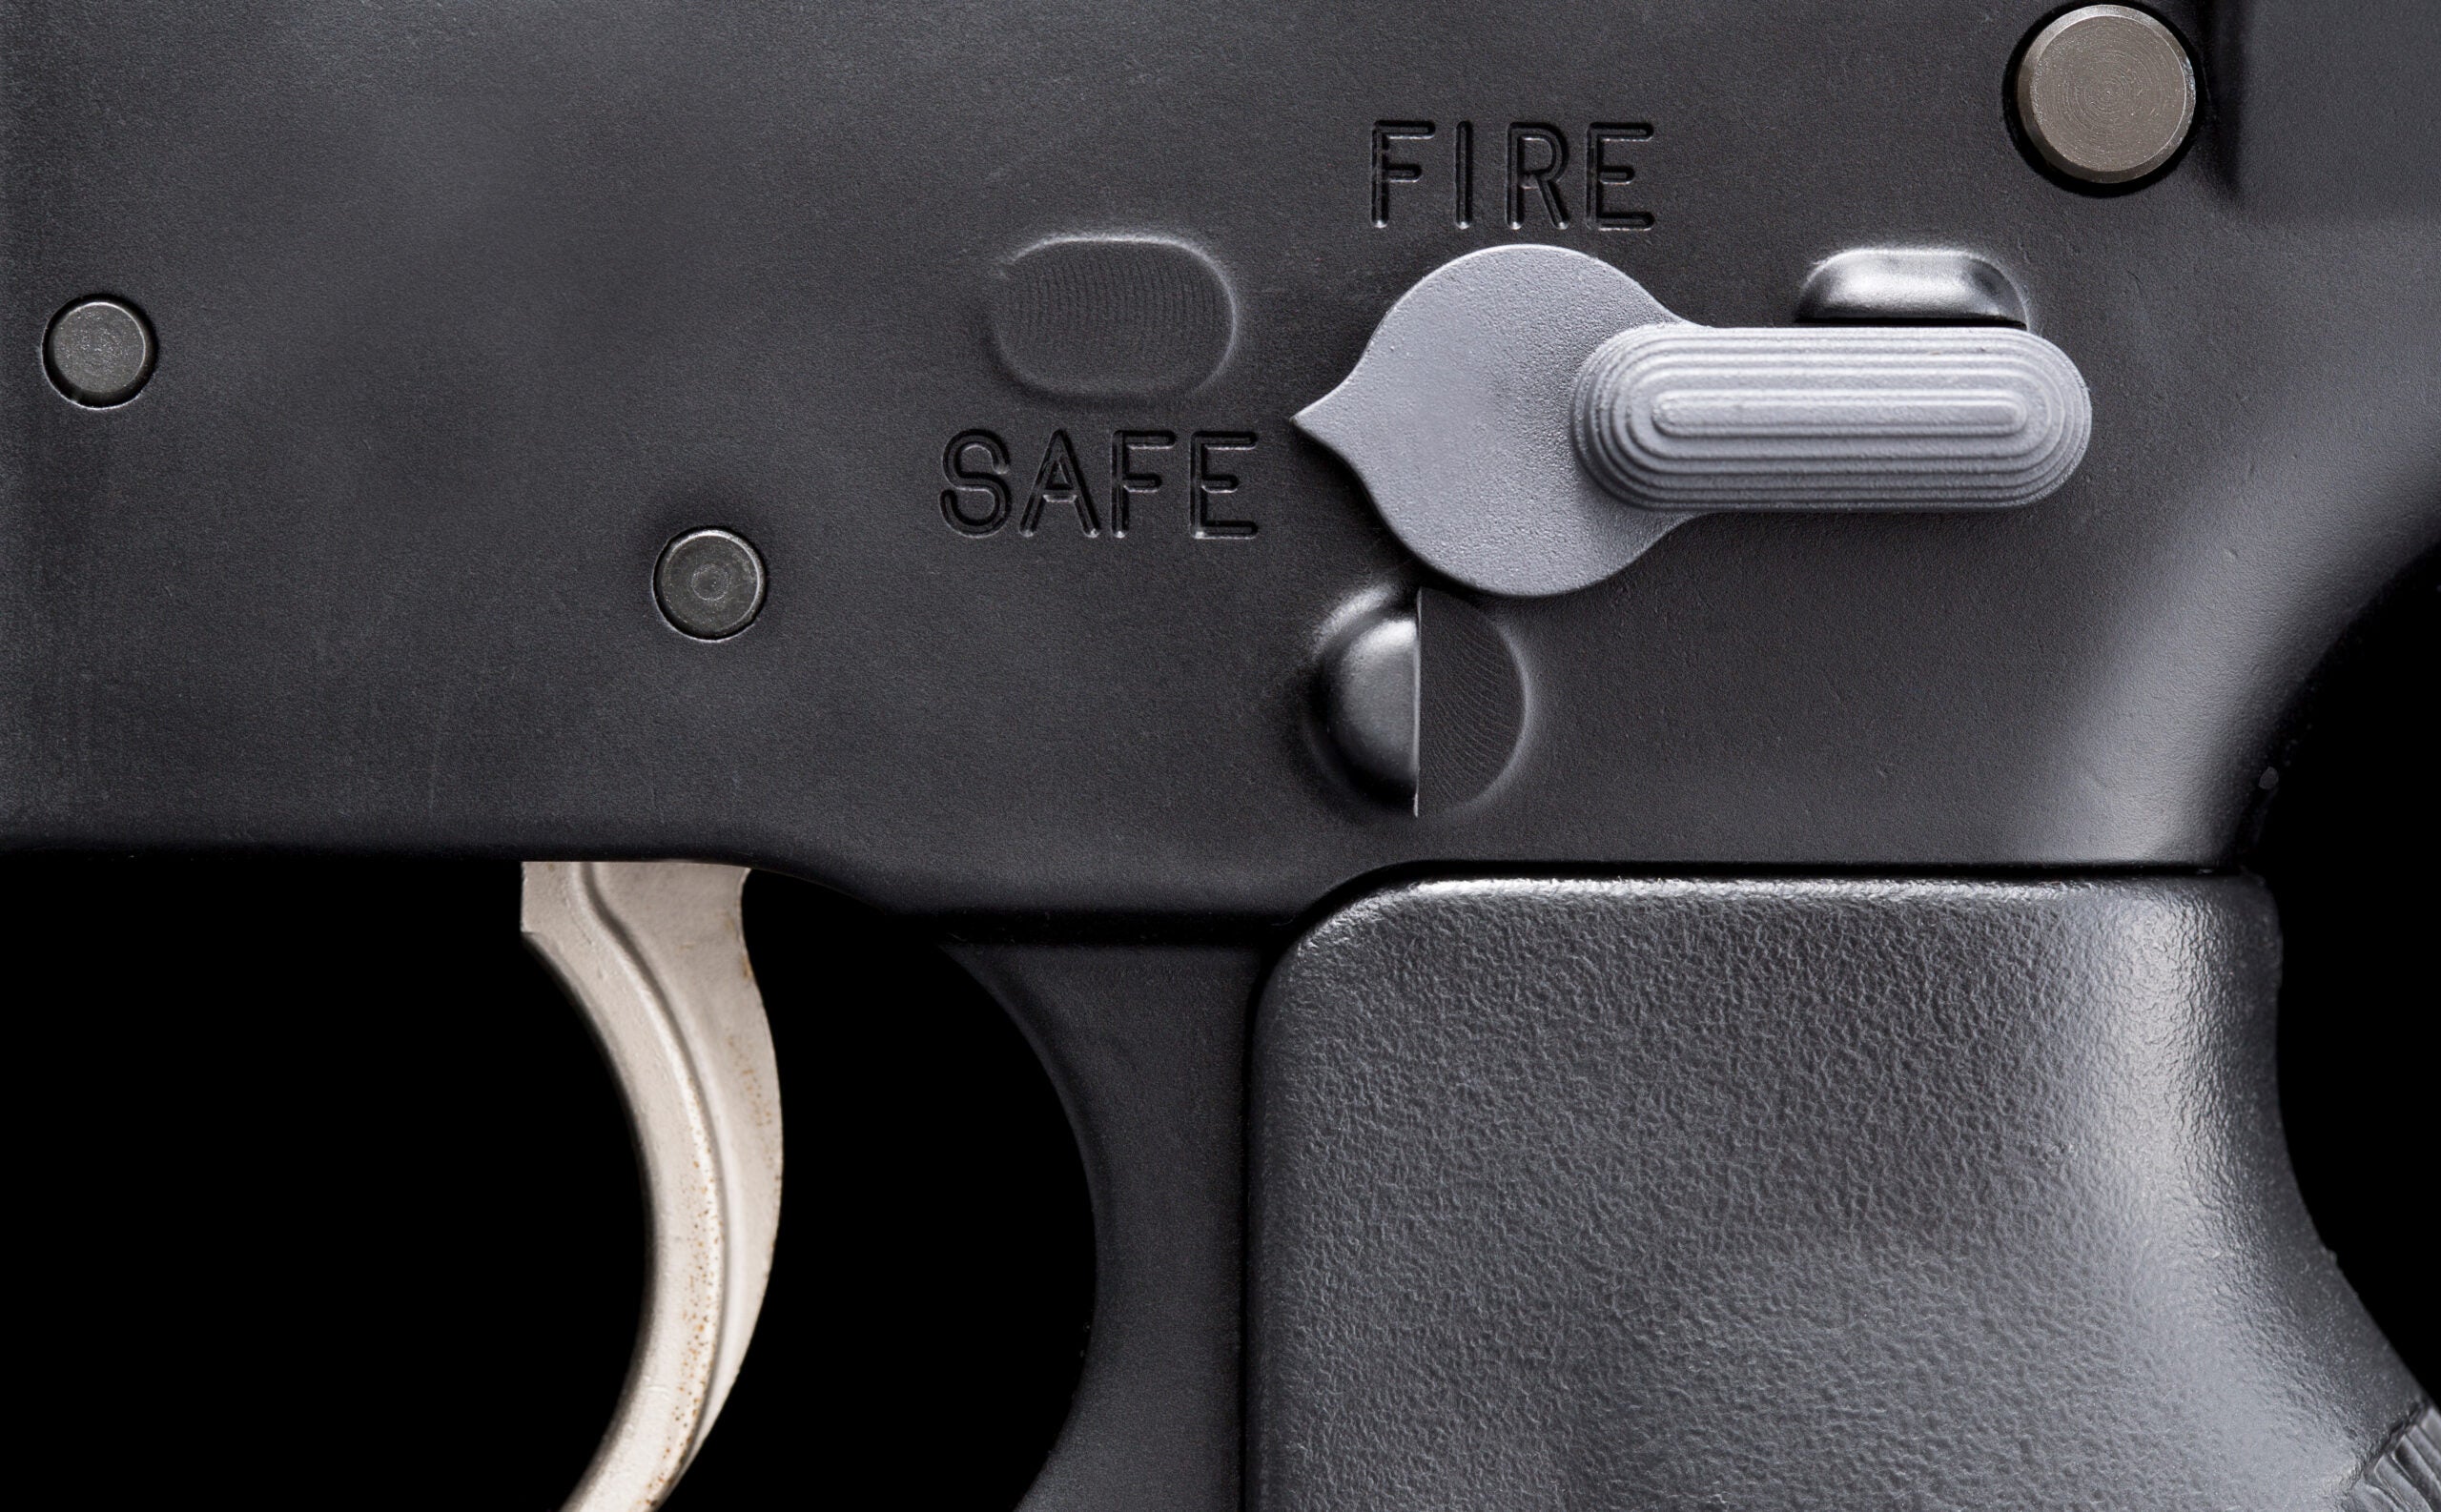 Closeup of a firearm safety, showing the both the safe and fire positions